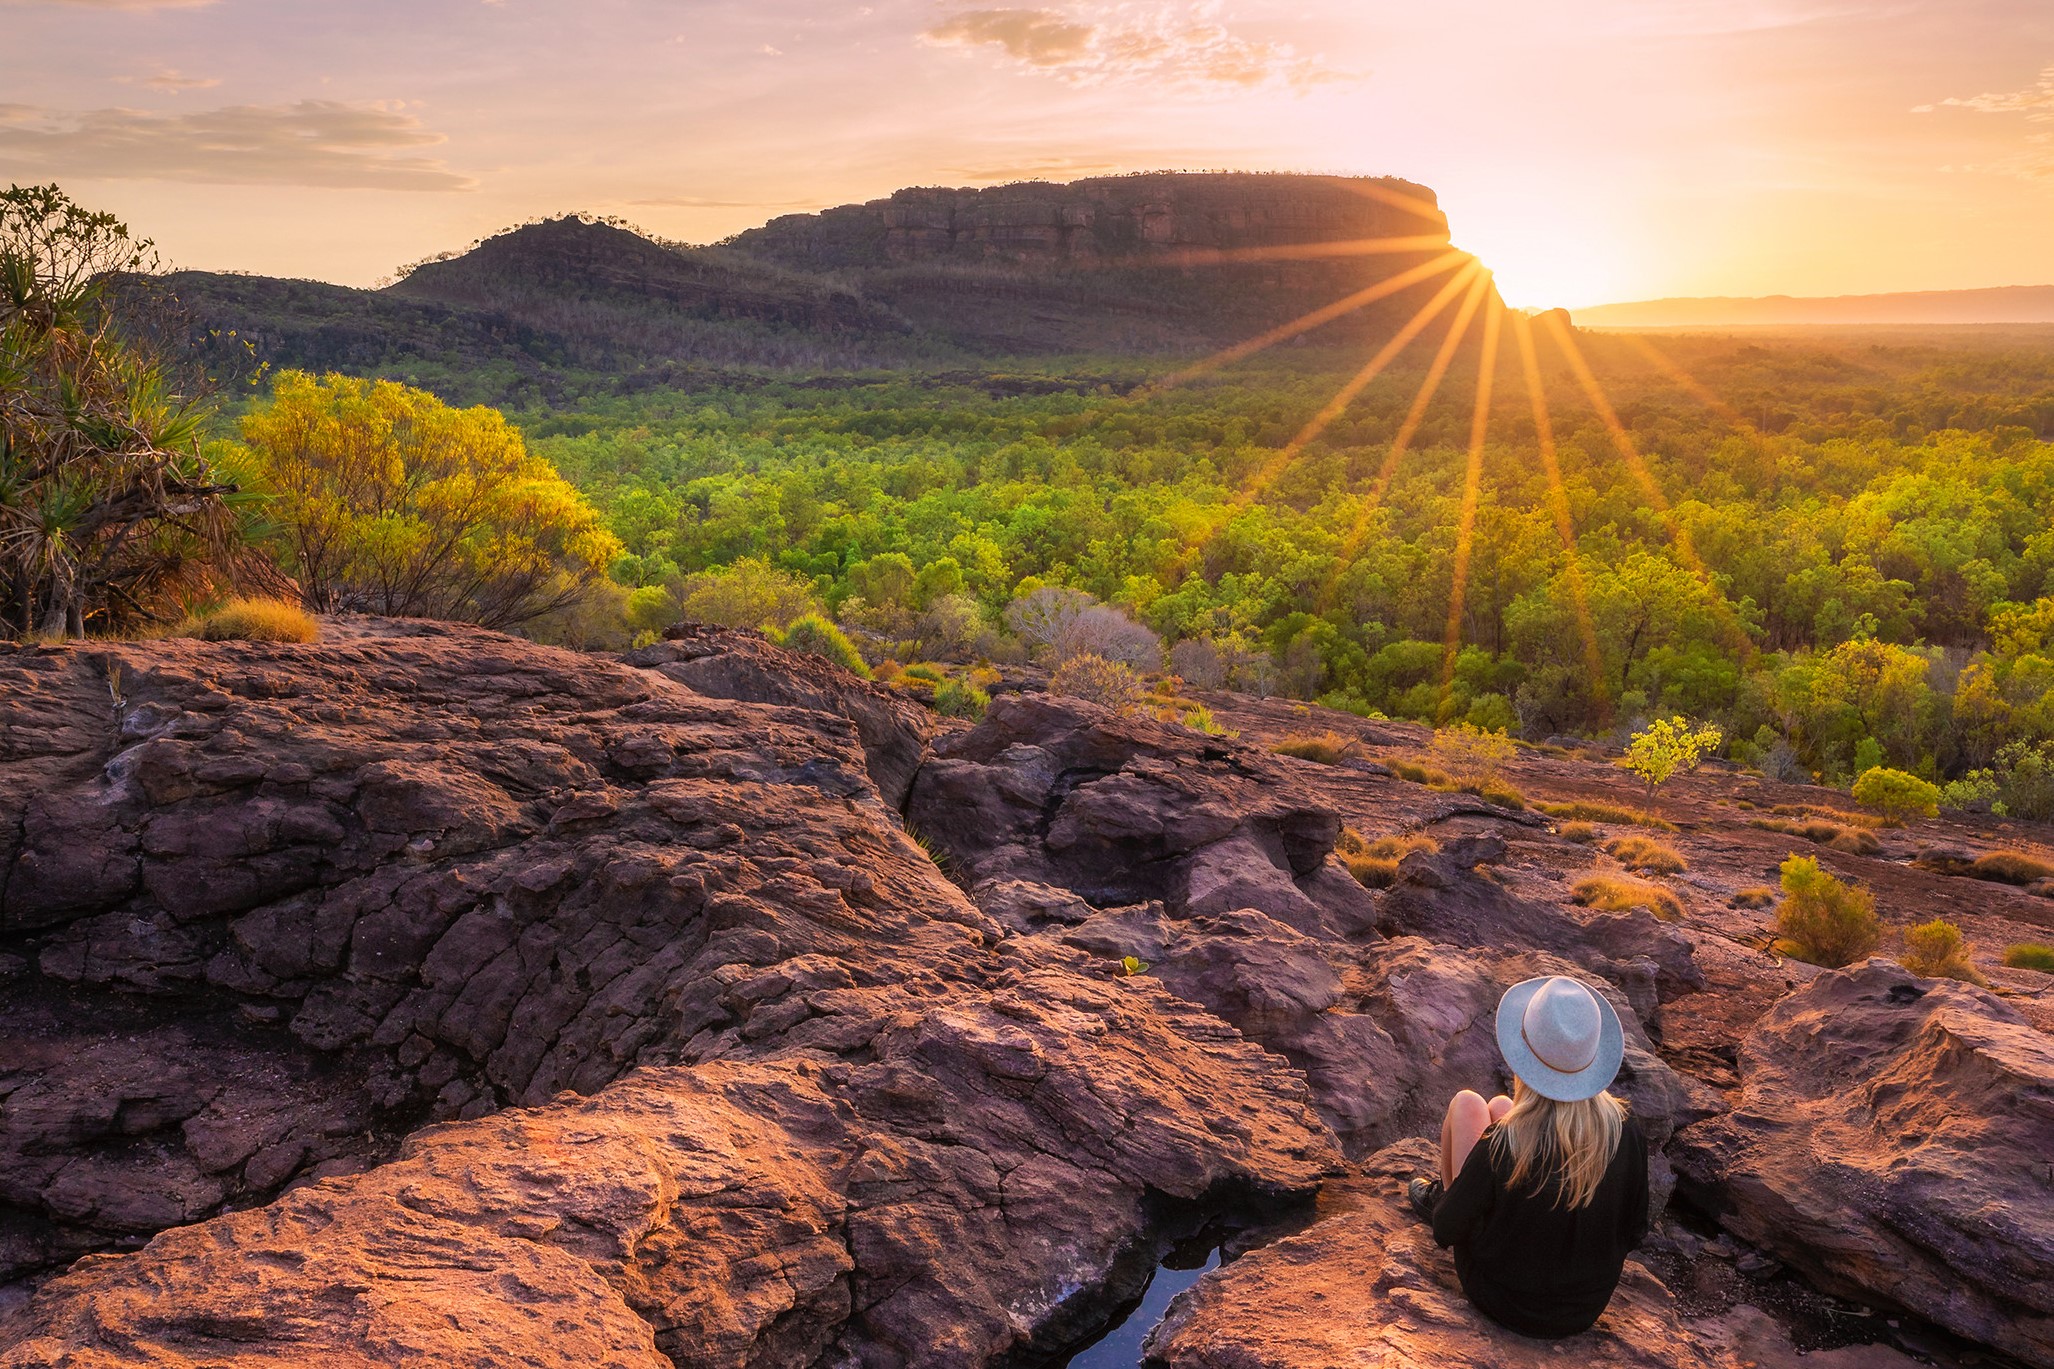 4-Day Kakadu and Katherine Experience Tour from Darwin  (Private Double/Twin Room): Kakadu National Park | Bowali Visitor Centre | Guluyambi Cultural Cruise | Ubirr Rock | 